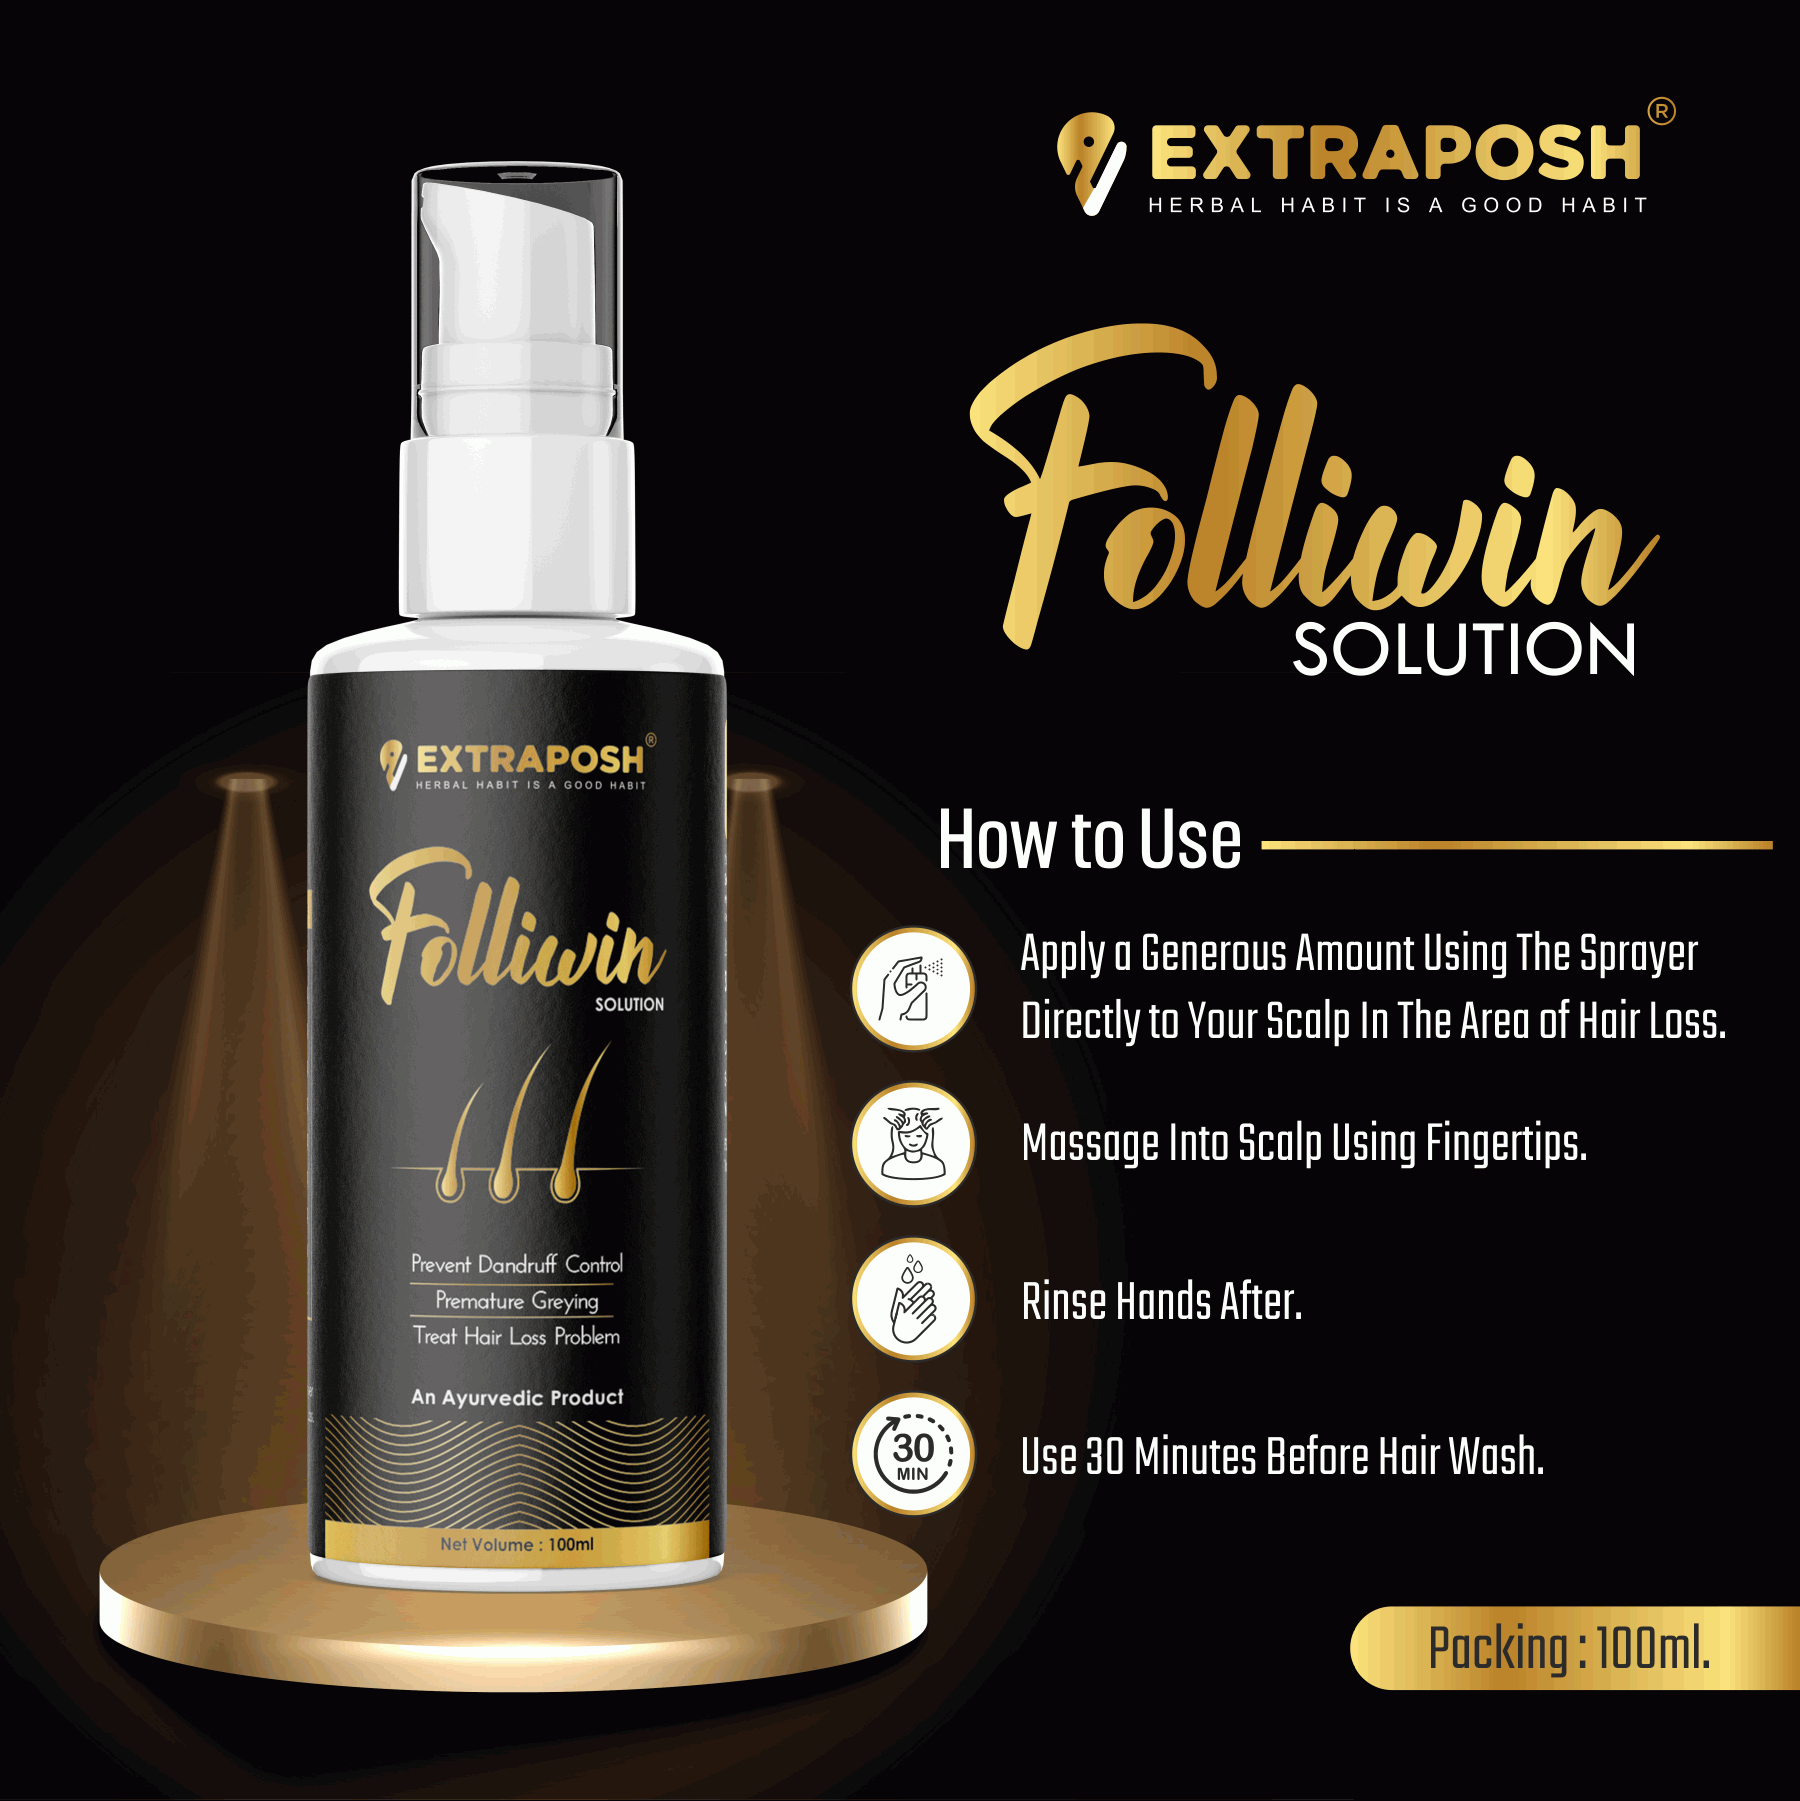 Scalp Cleanser Folliwion Solution is Apply a generous amount using the sprayer directly to your scalp in the area of hair loss and dandruff